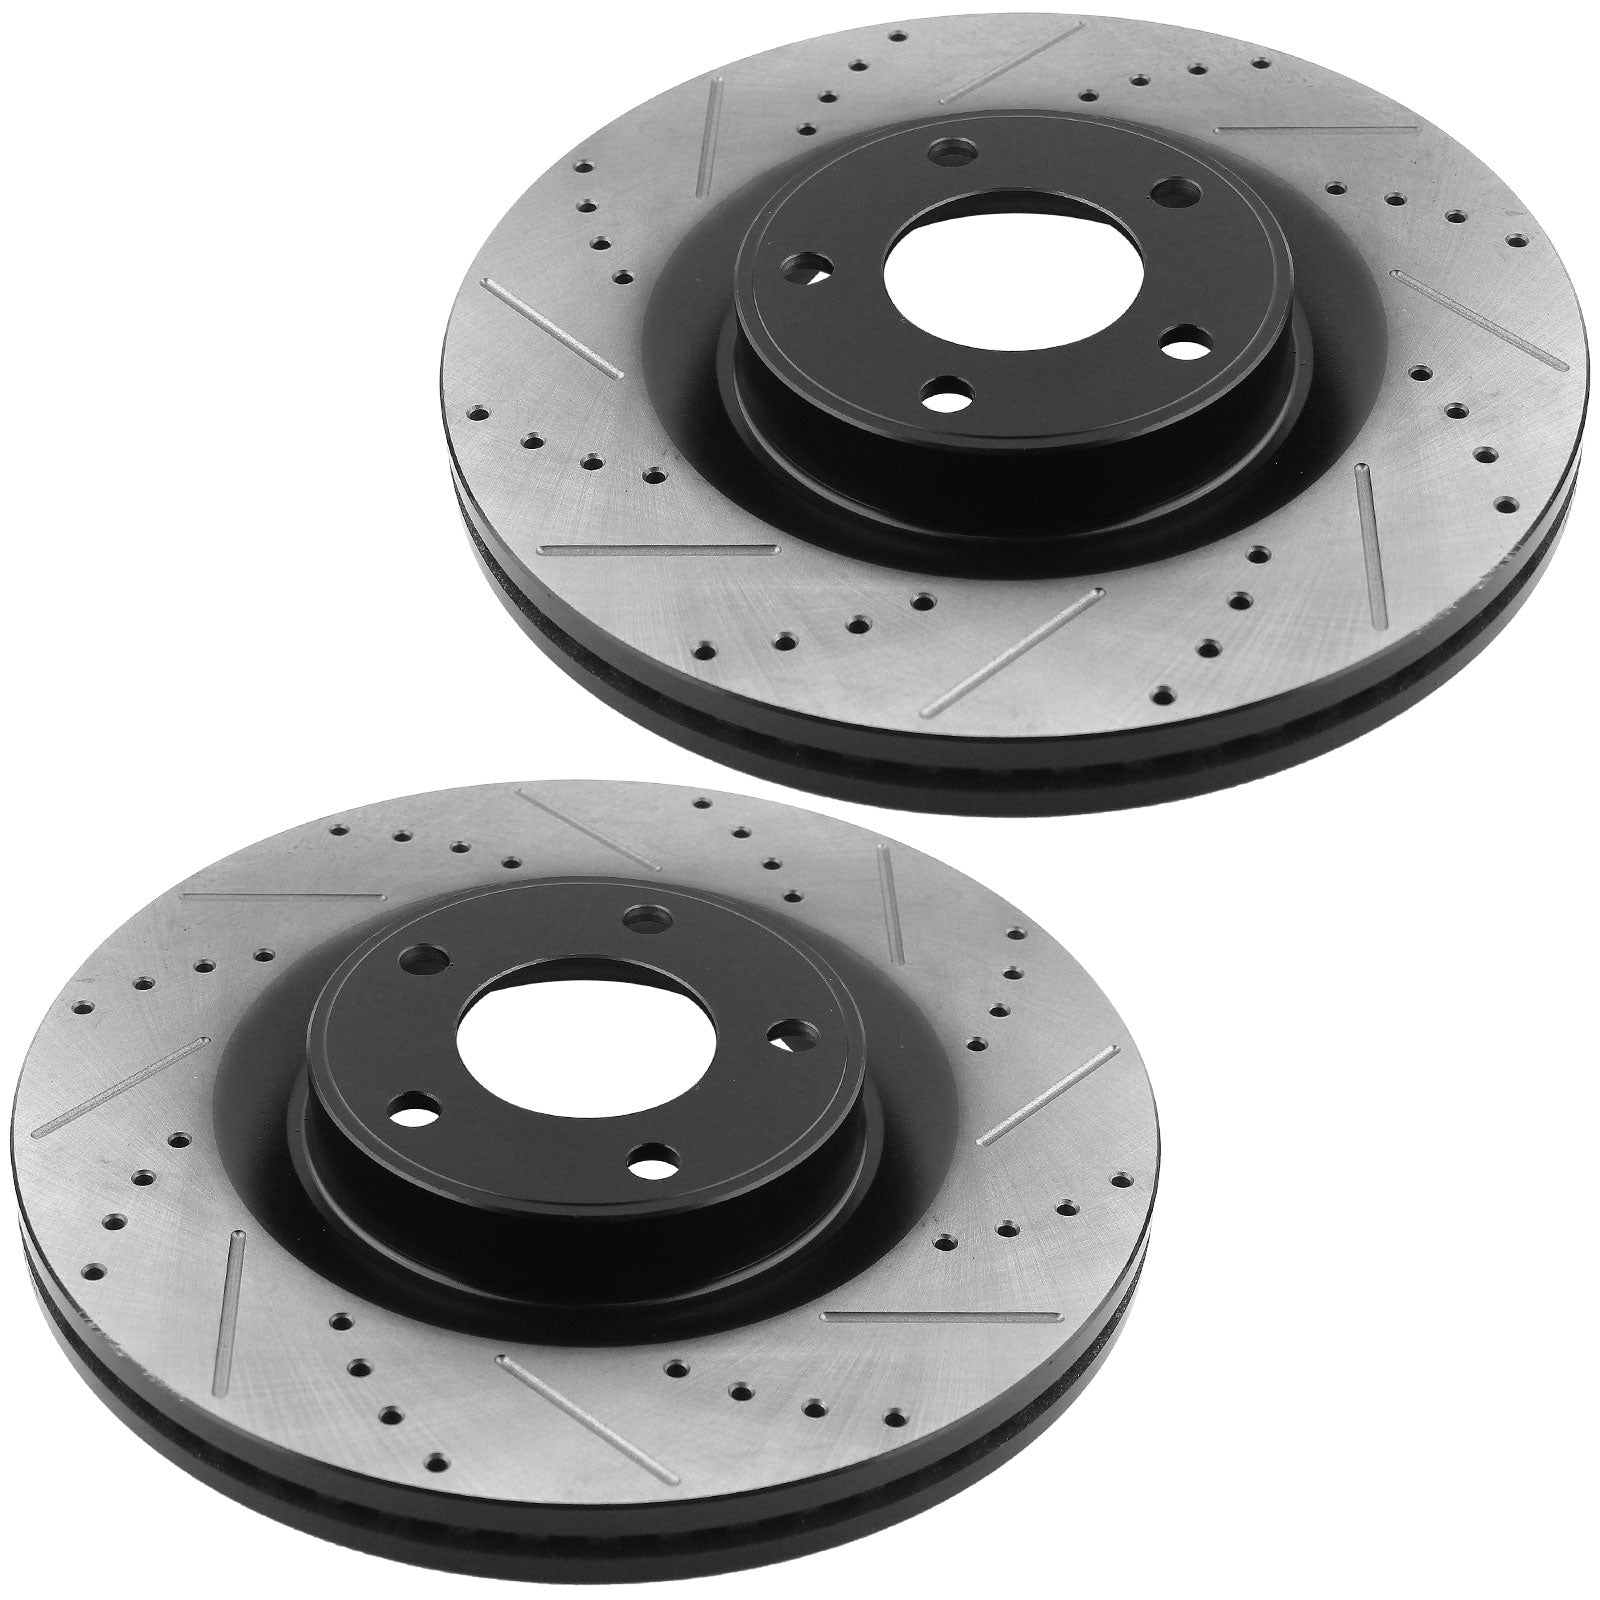 MotorbyMotor (AWD) Front Drilled Disc Brake Rotors w/Ceramic Brake Pads Kit + Cleaner & Fluid Fit 2007-2009 Ford Edge, 2007-2009 Lincoln MKX, 5 Lugs Count-54154 MotorbyMotor